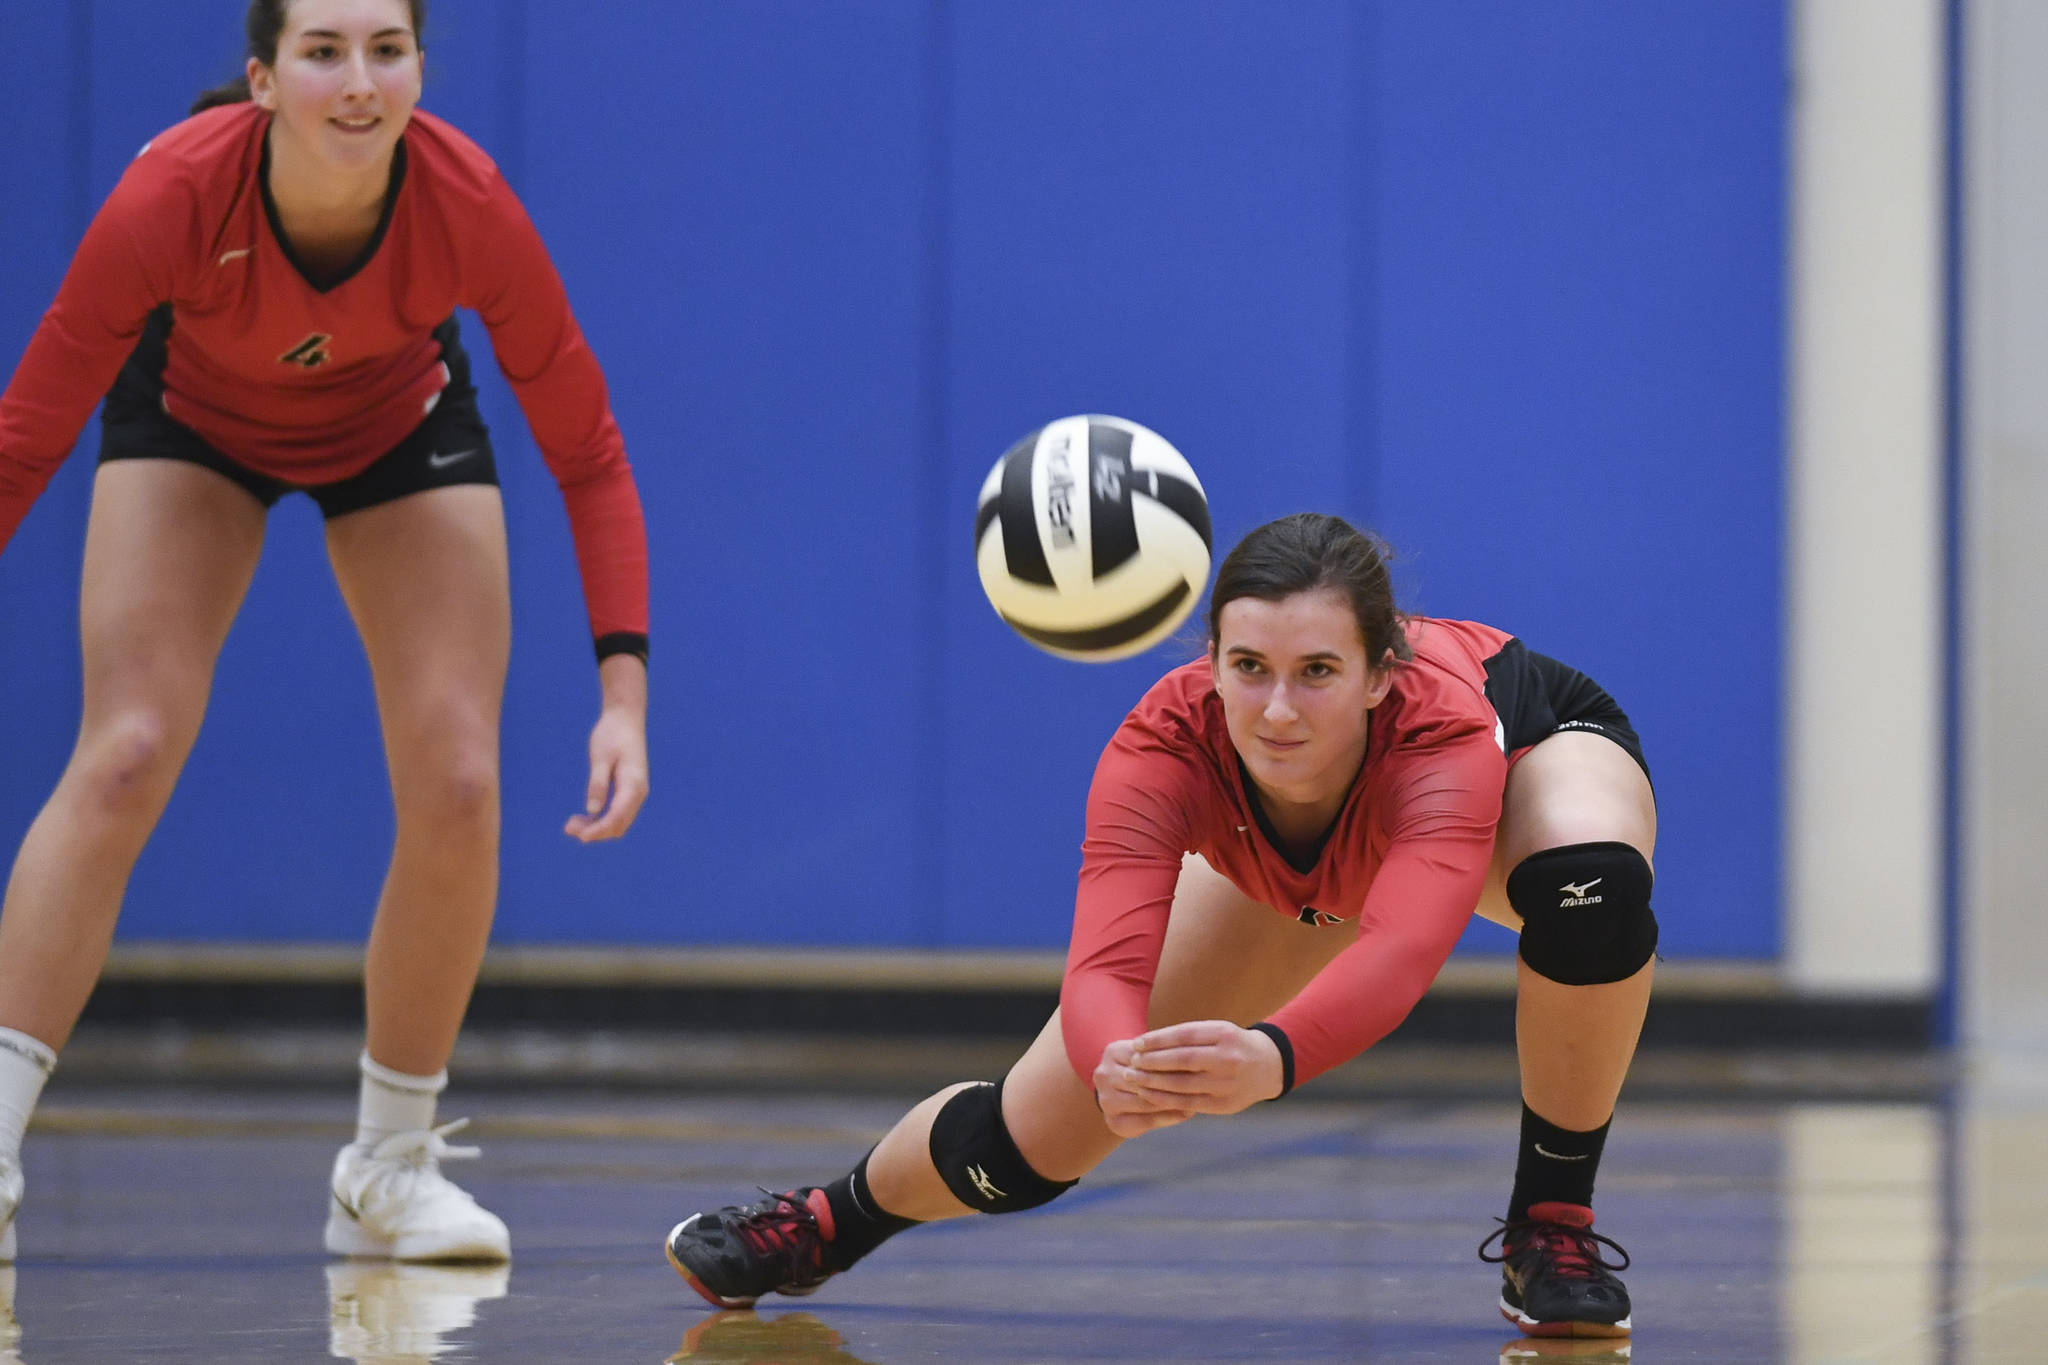 Juneau-Douglas’ Addie Prussing bumps the ball up against Ketchikan during the Region V Volleyball Tournament at Thunder Mountain High School on Thursday, Nov. 7, 2019. JDHS won 25-8, 25-14, 14-25, 25-15. (Michael Penn | Juneau Empire)